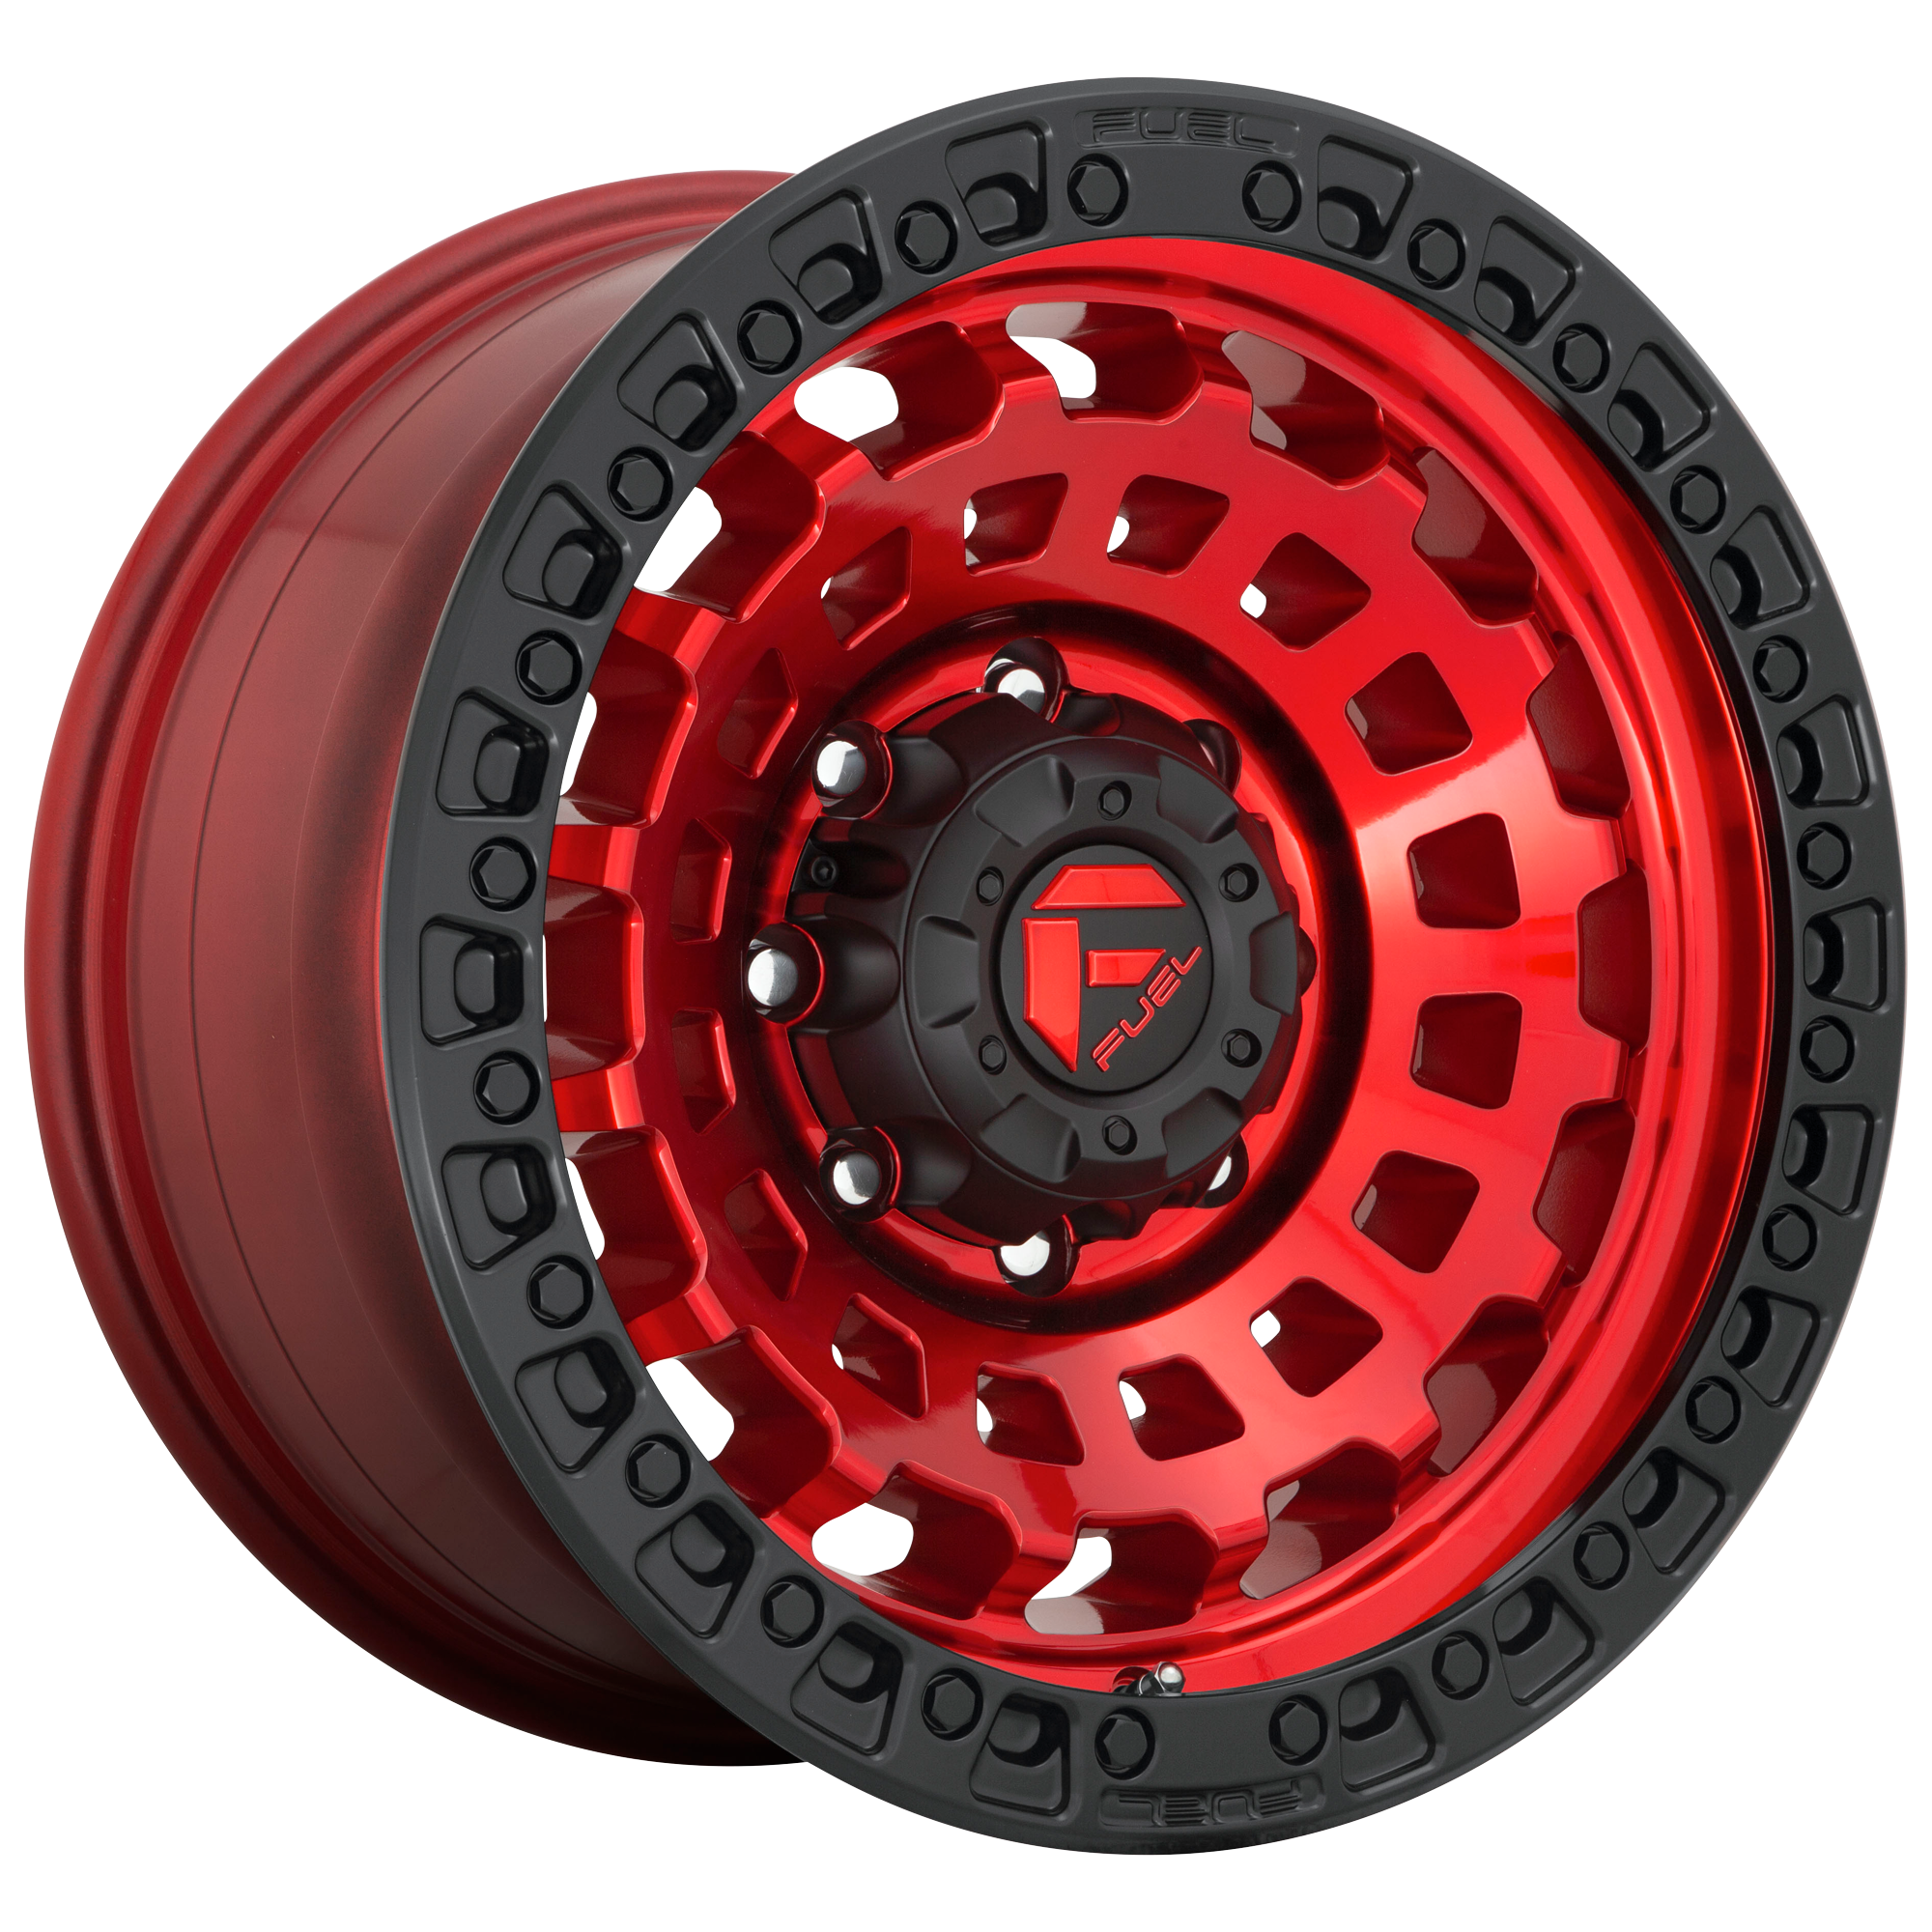 ZEPHYR 20x9 6x135.00 CANDY RED BLACK BEAD RING (1 mm) - Tires and Engine Performance